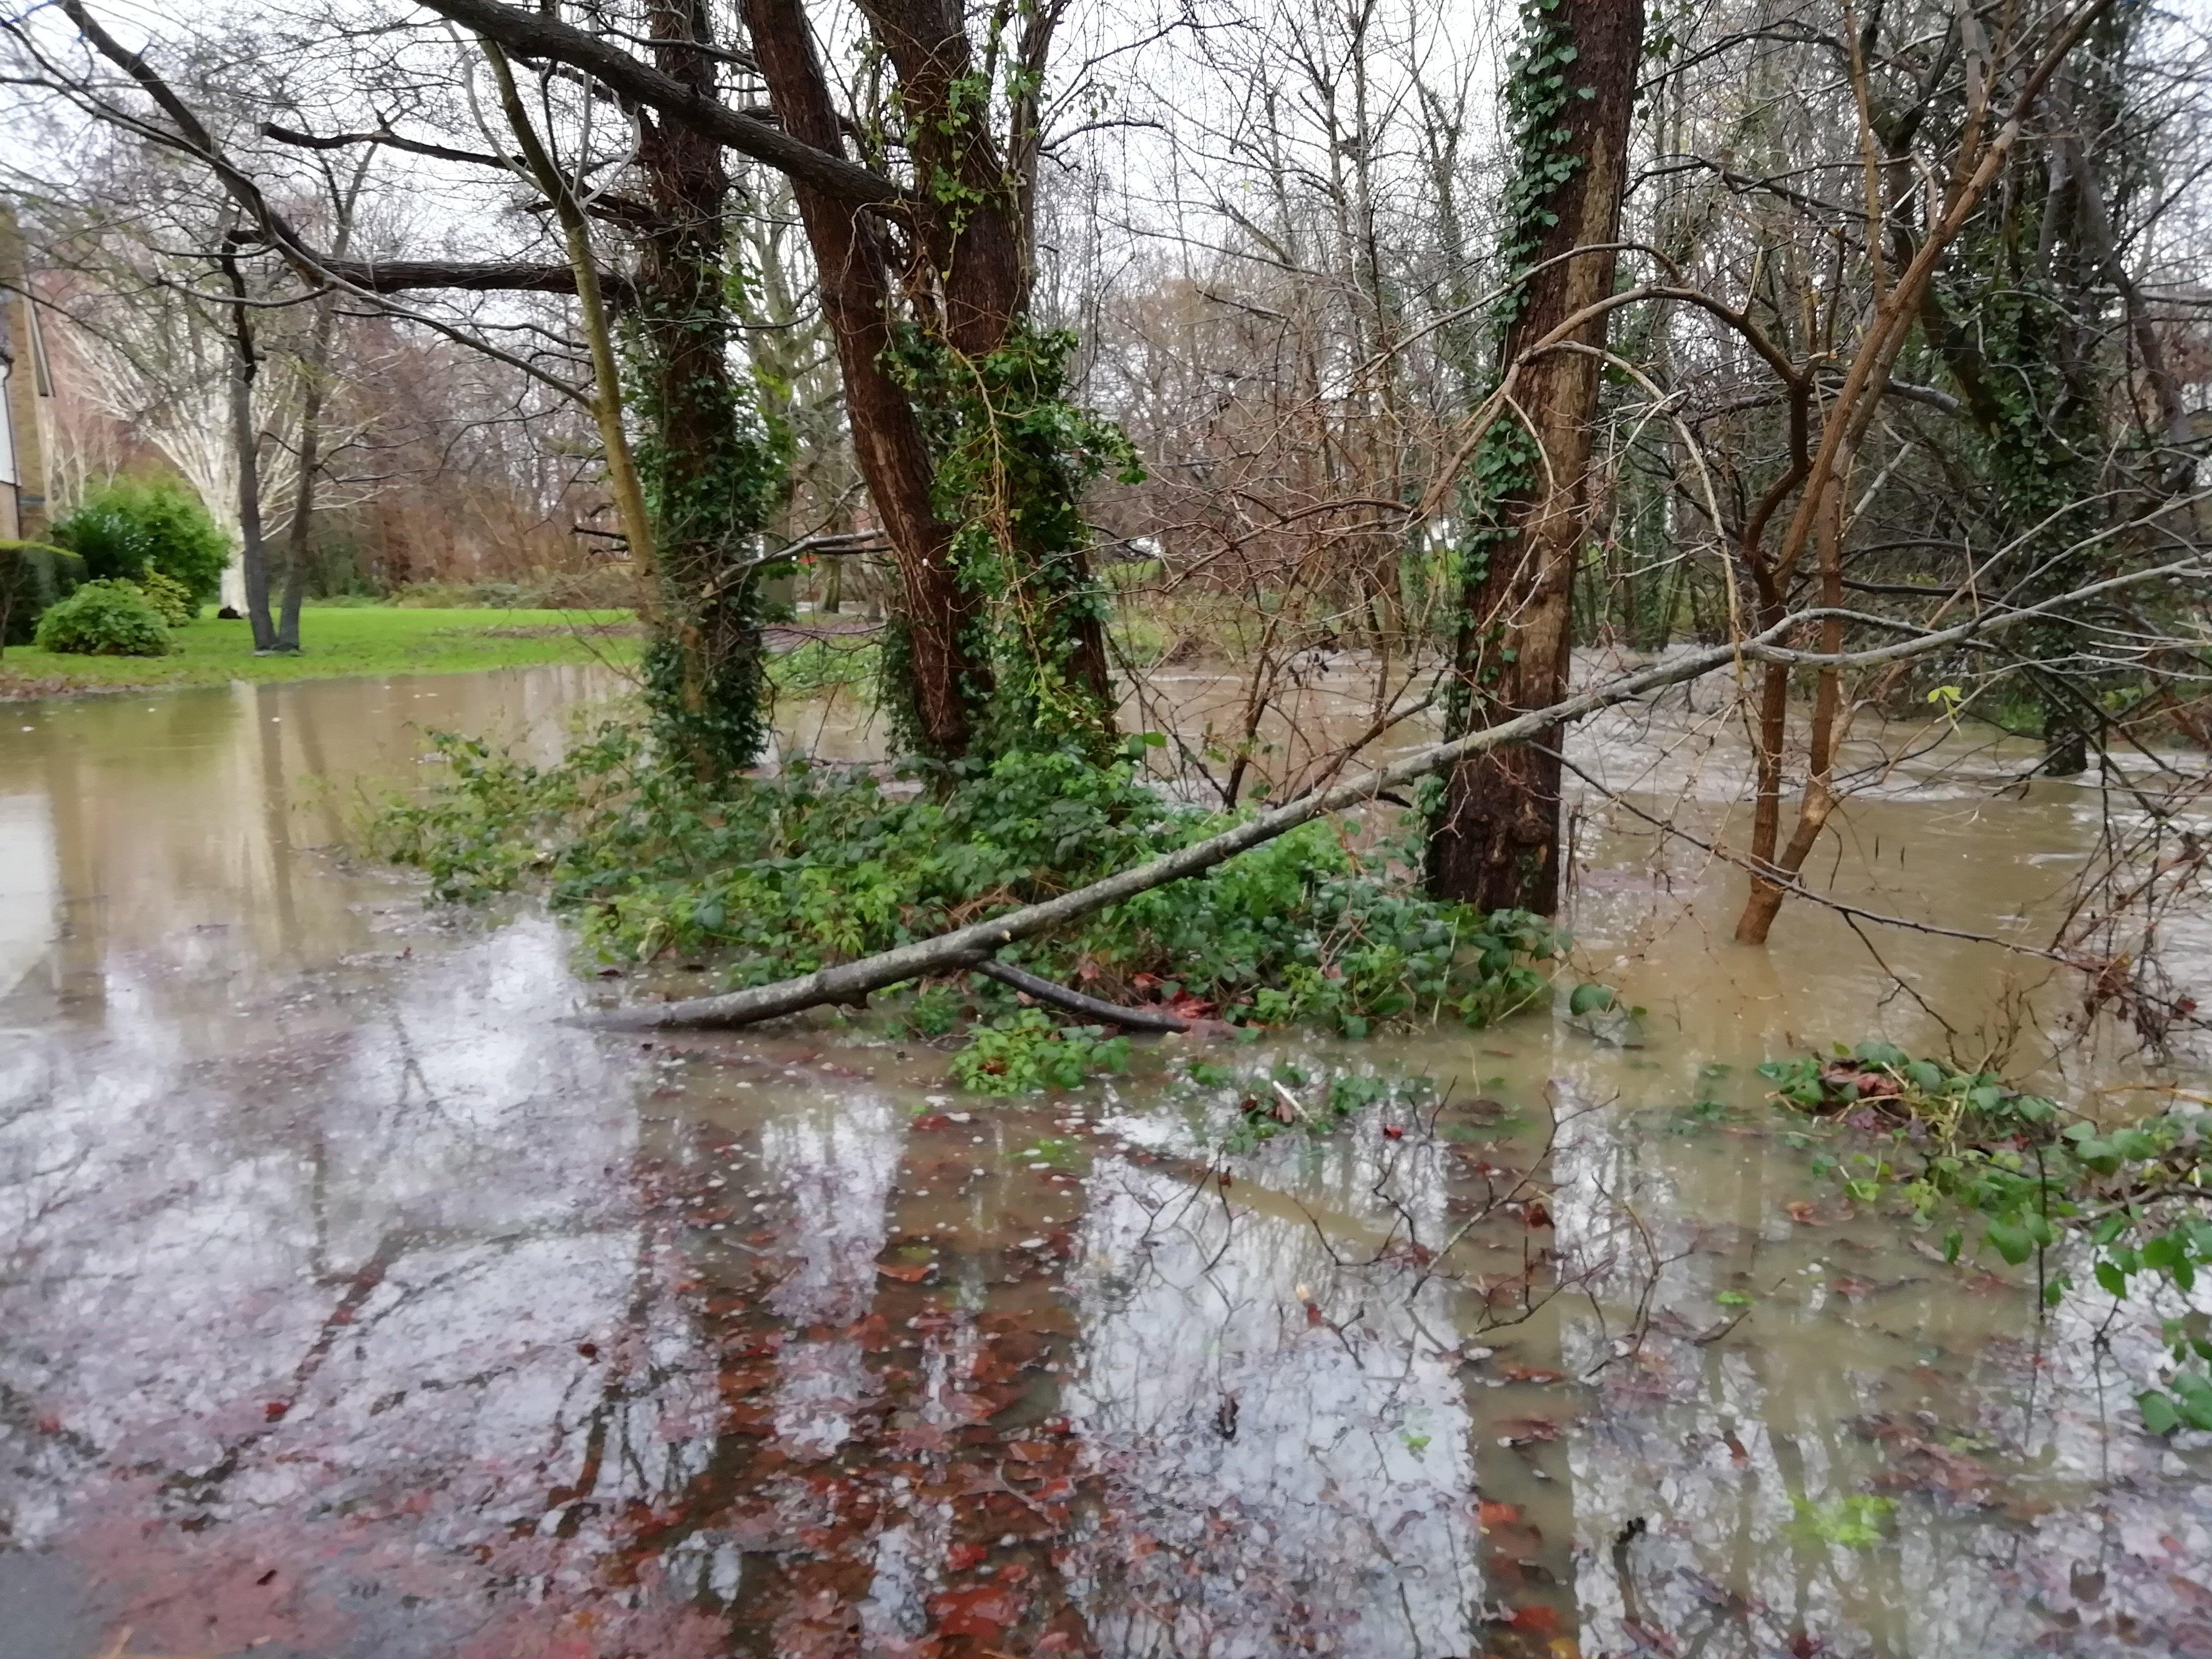 Green spaces have been submerged under floodwater